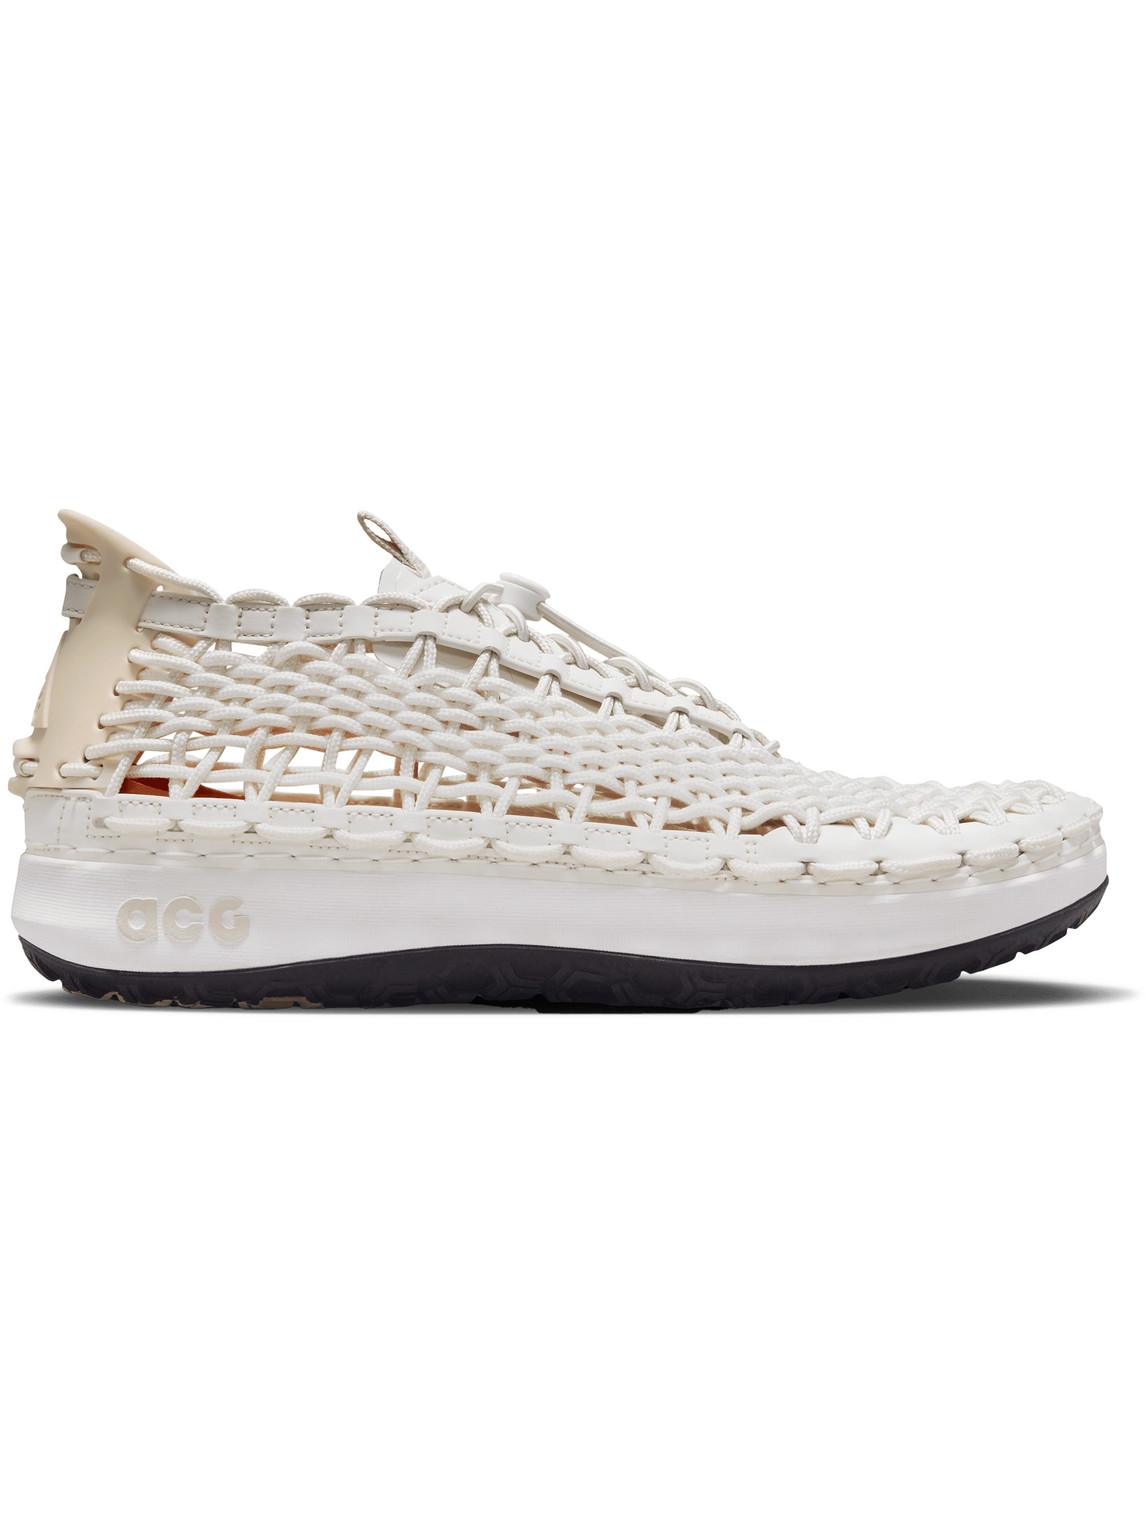 Nike Acg Watercat Woven Leather And Rubber-trimmed Woven Trainers In White  | ModeSens